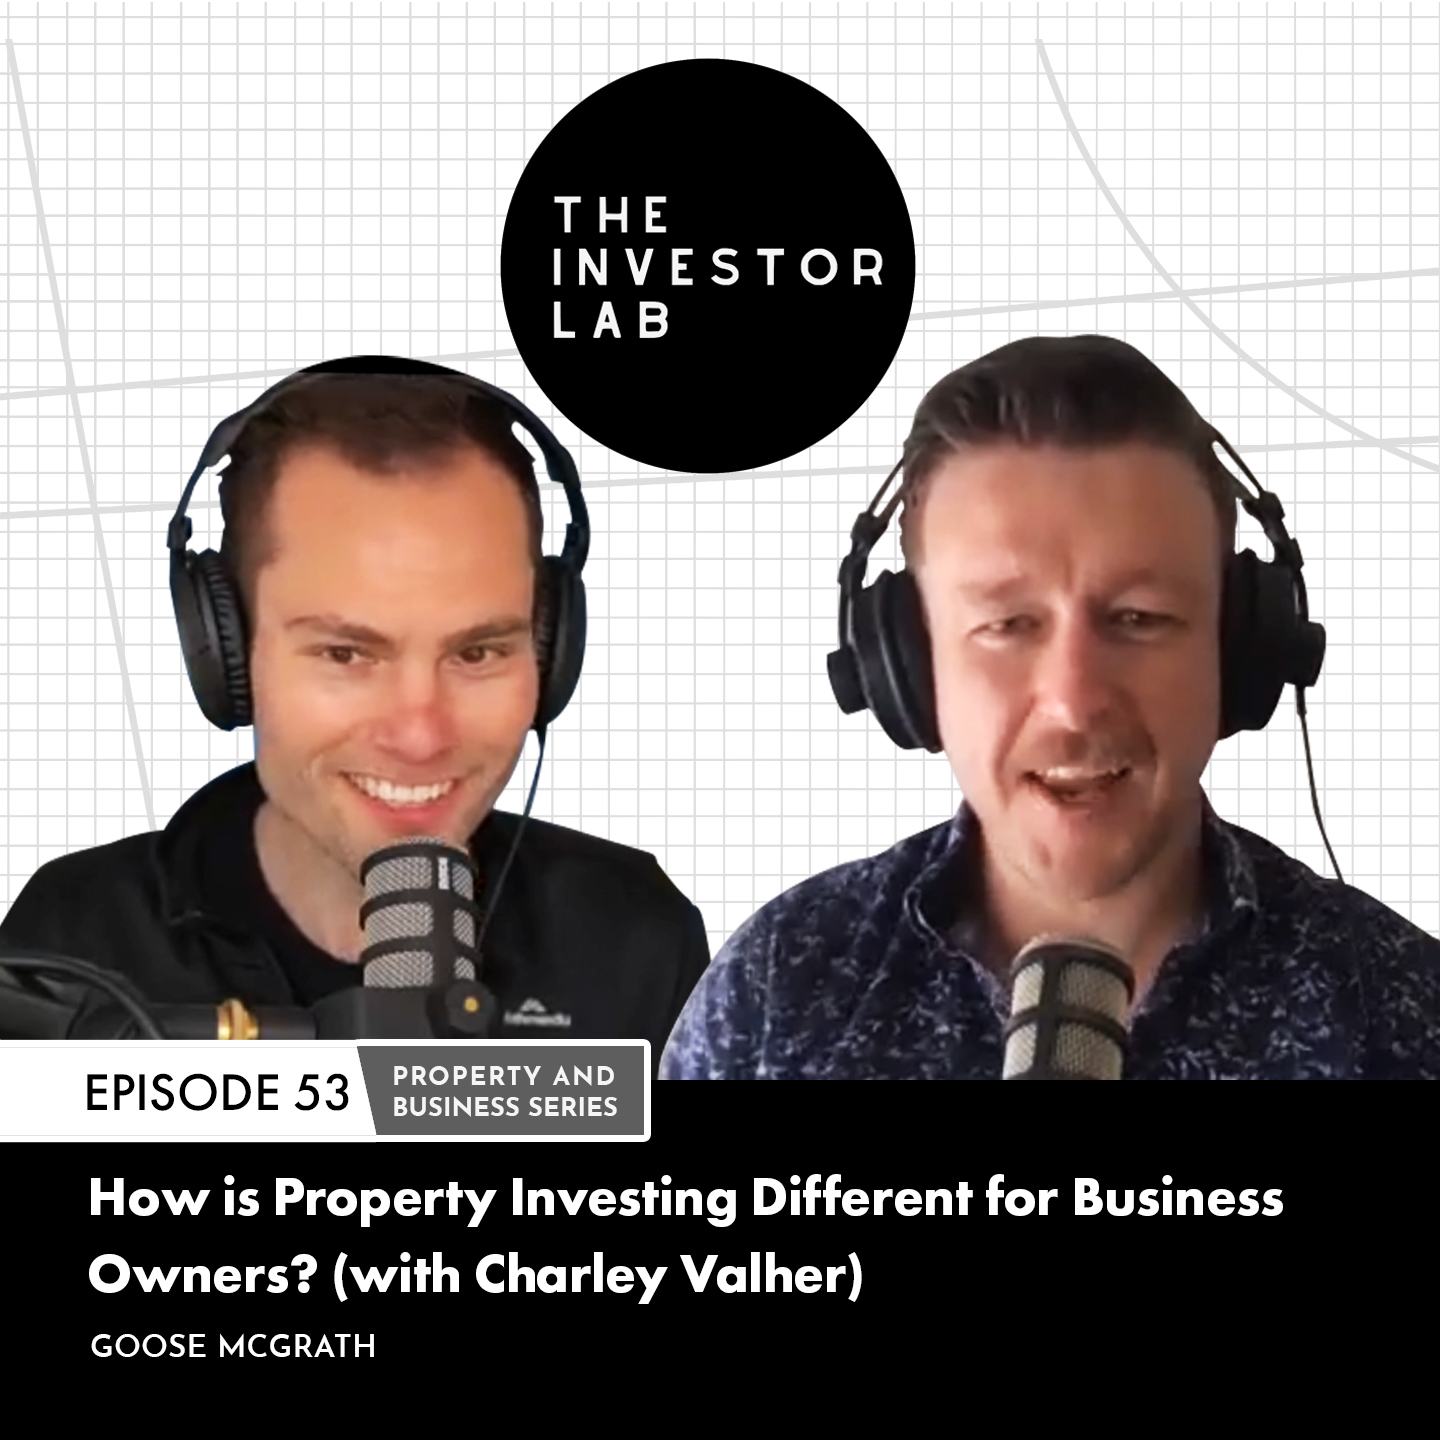 How is Property Investing Different for Business Owners? (with Charley Valher)